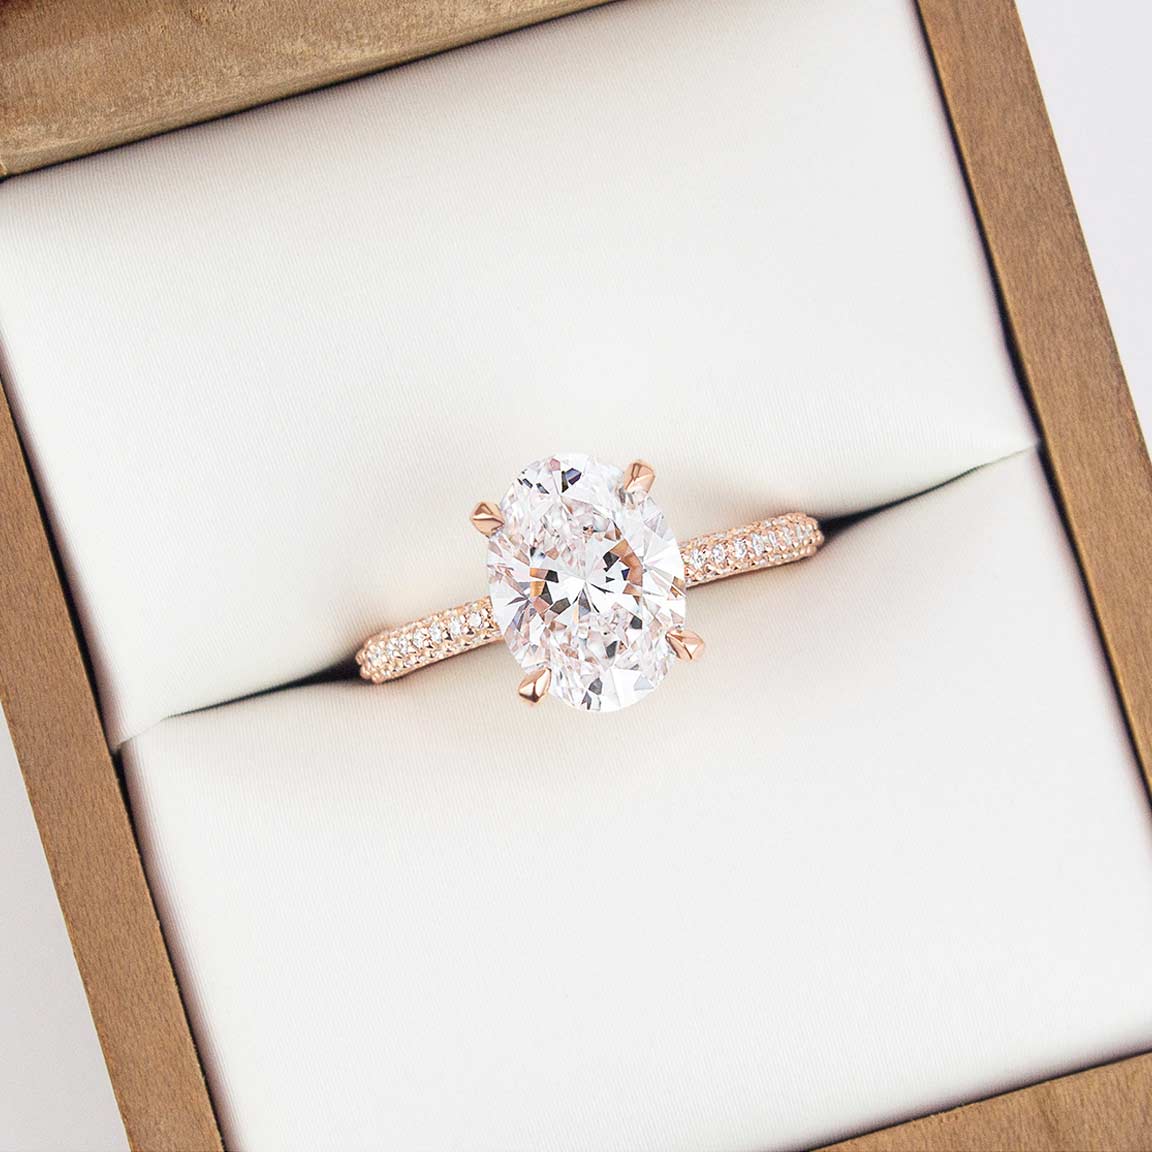 where to get a engagement ring